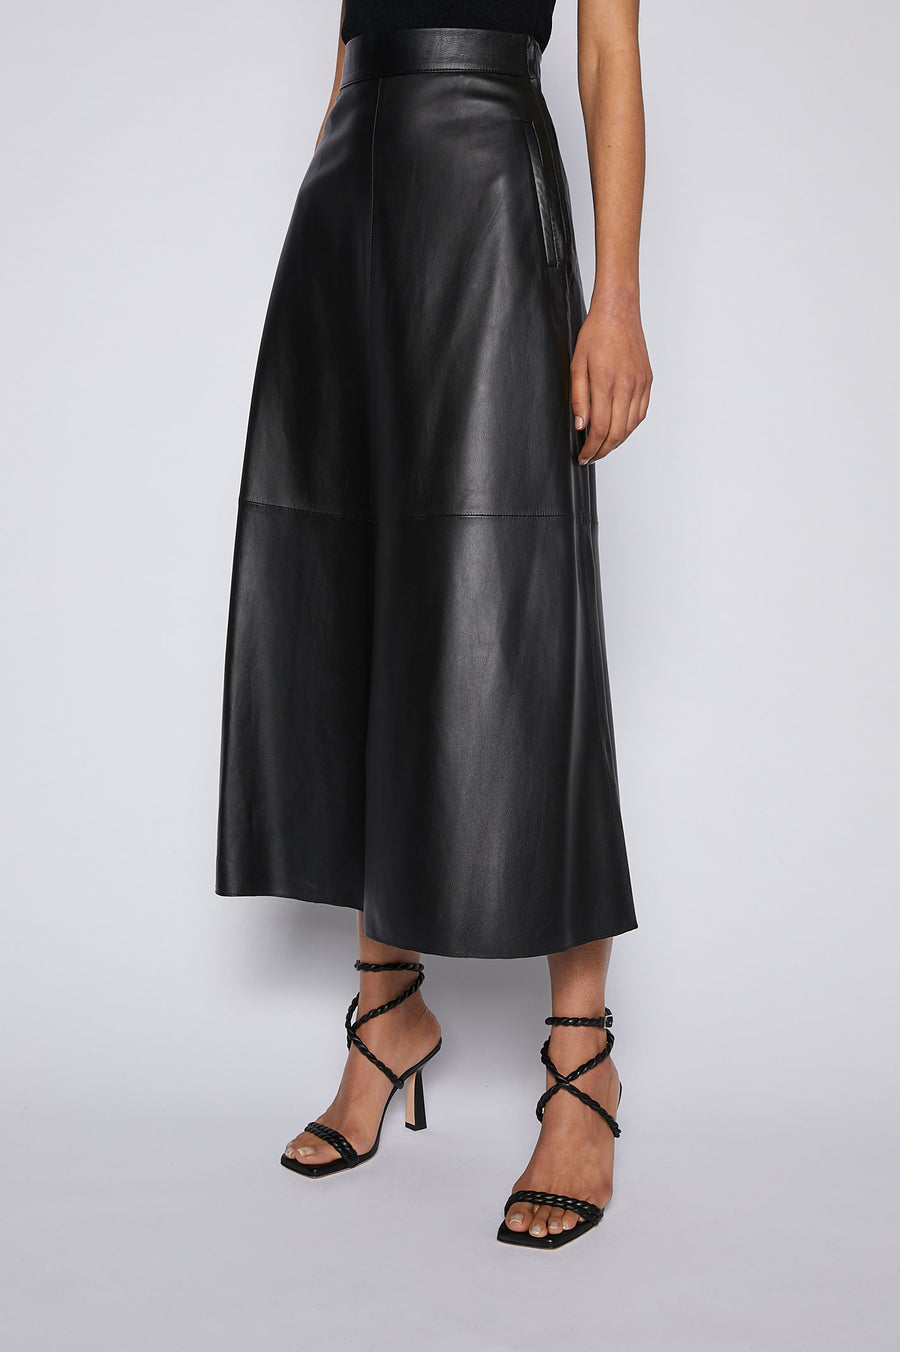 Reinvent your winter staples and invest in the leather long skirt.